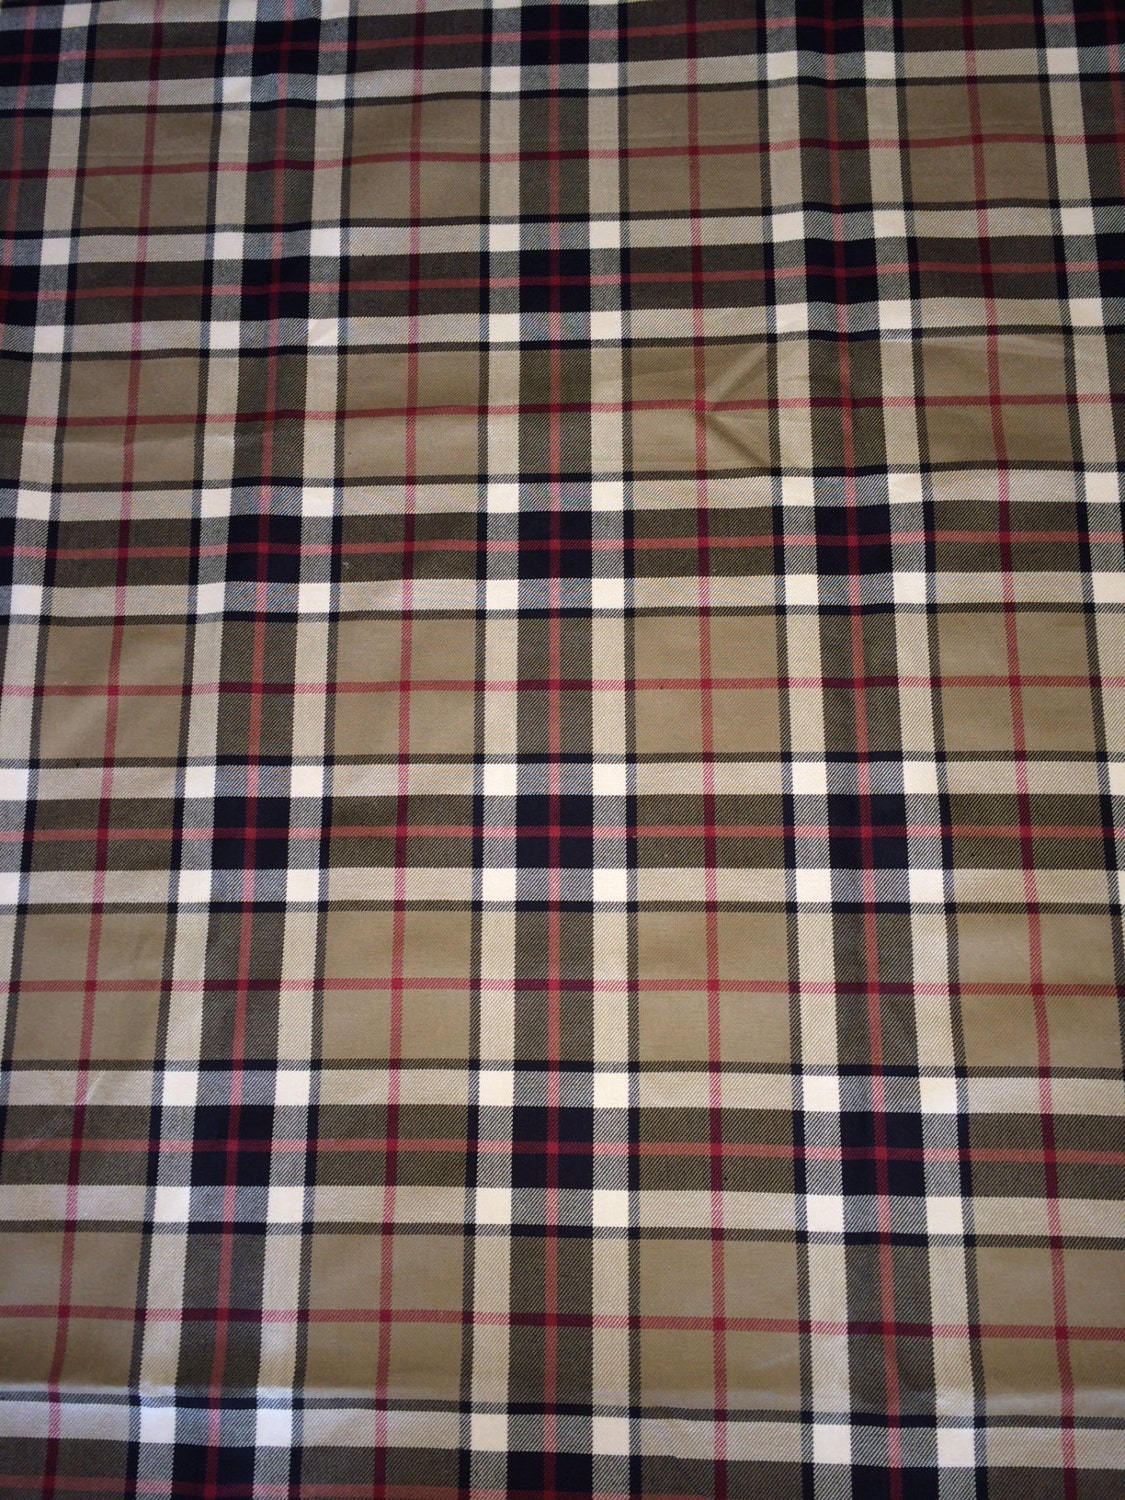 Burberry Inspired Plaid Fabric by the Yard - Etsy